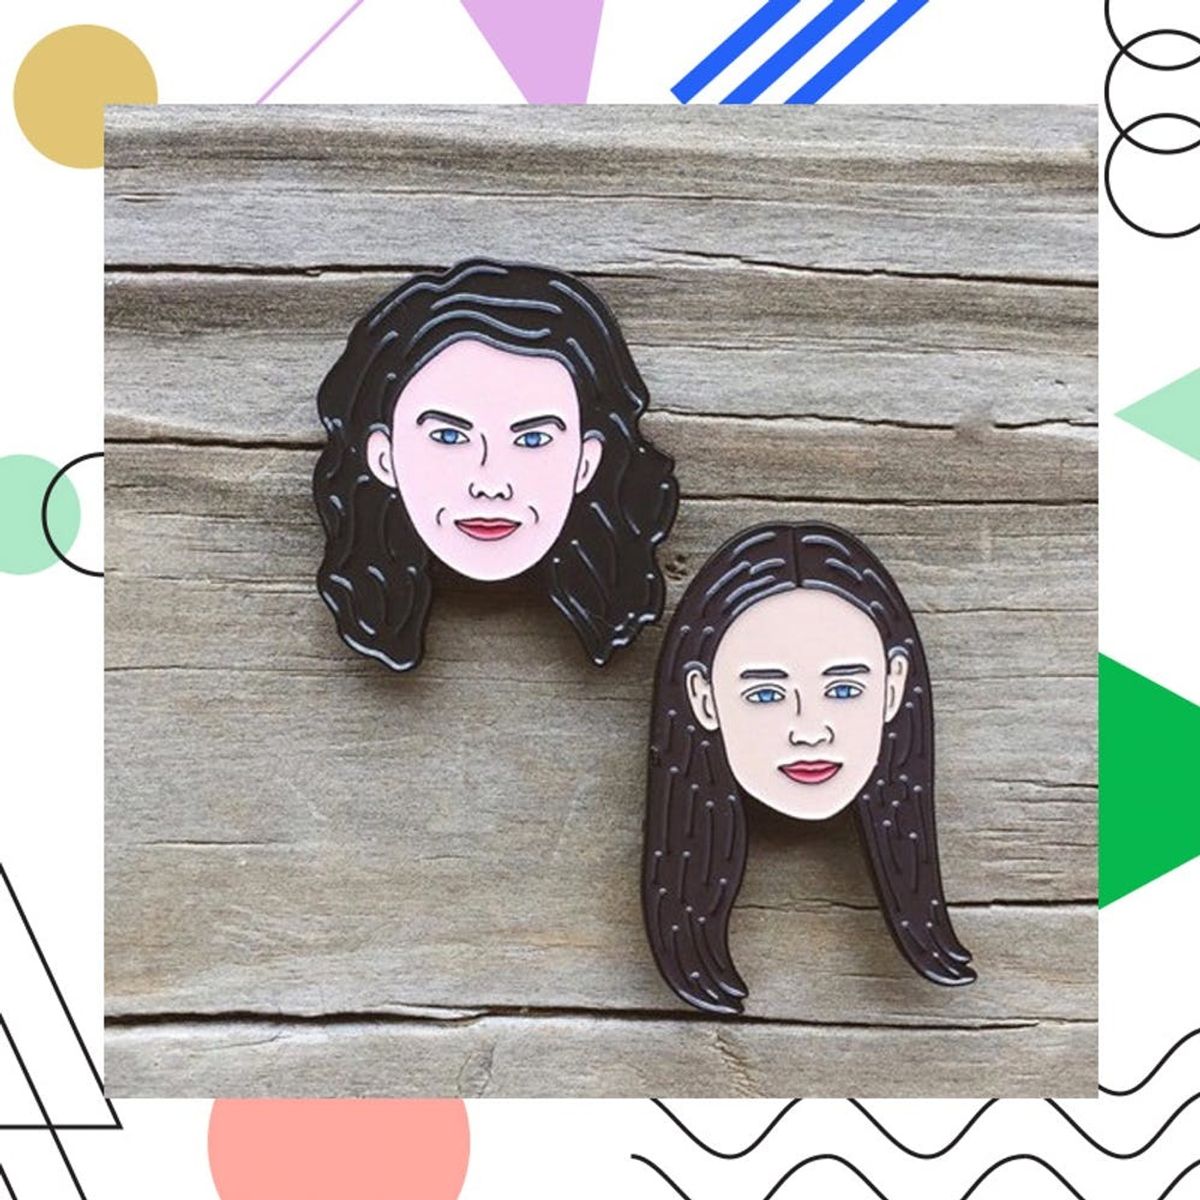 15 Must-Haves for Your Gilmore Girls Viewing Party